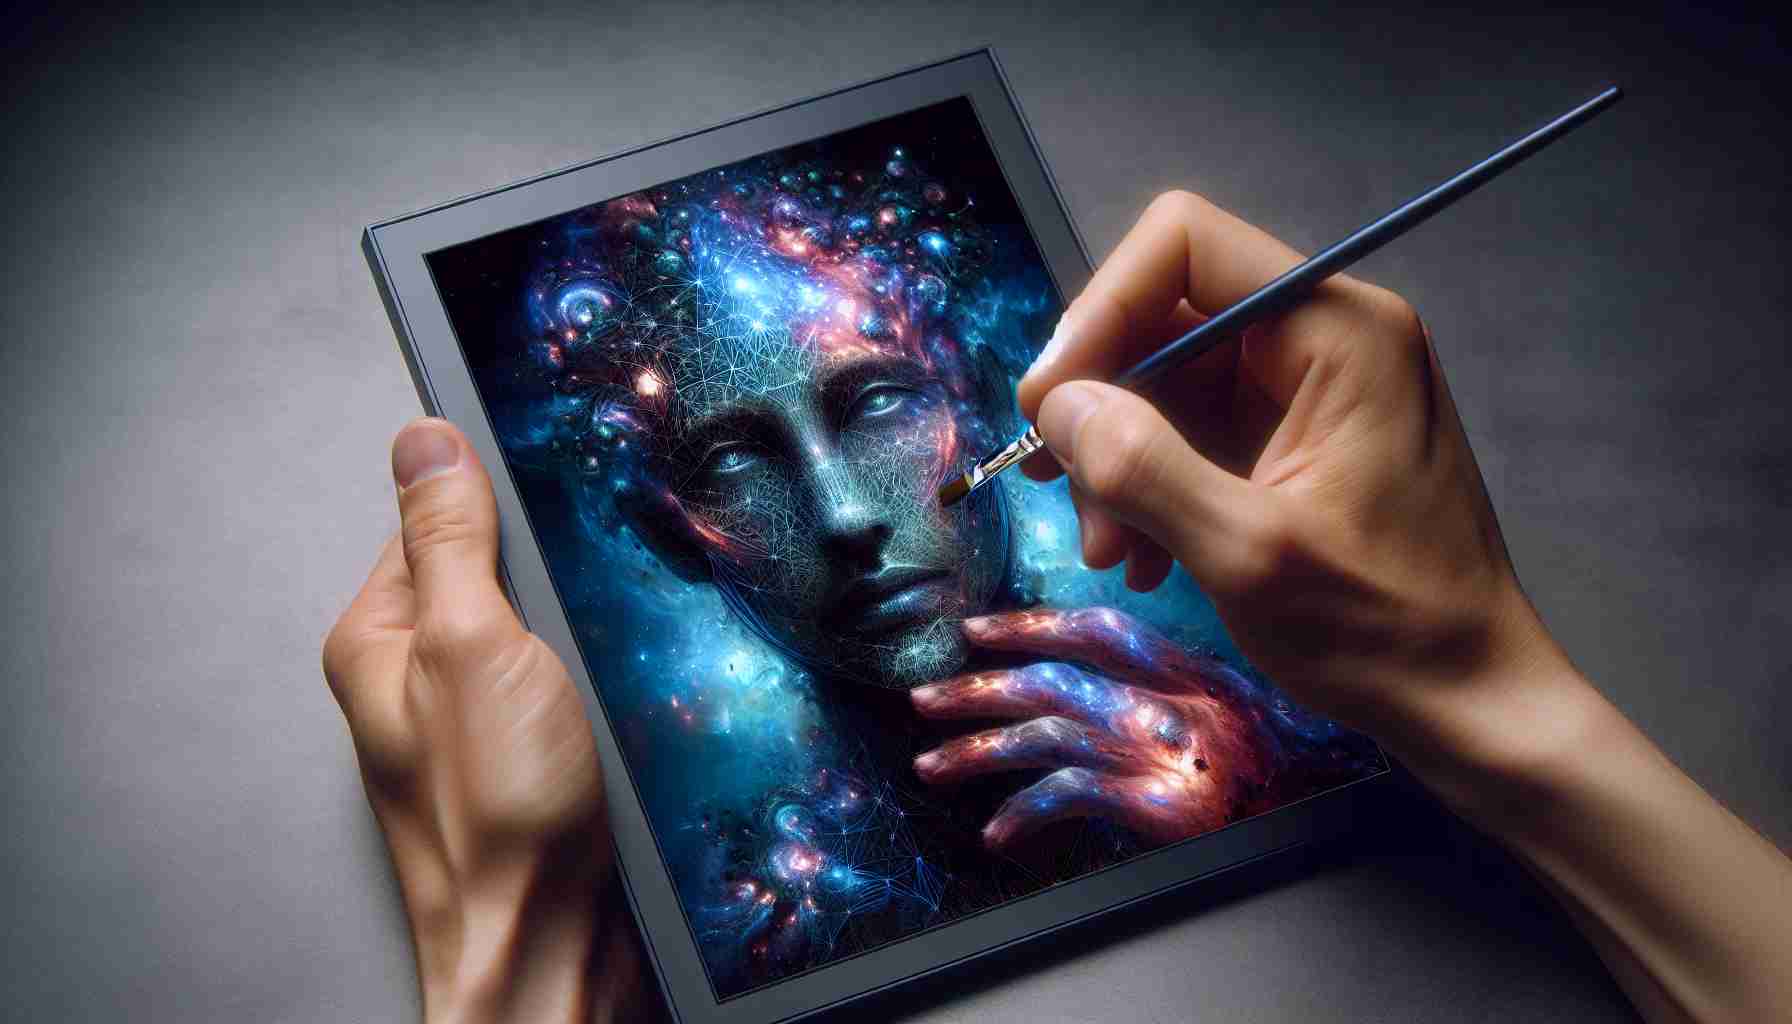 Create a realistic, high definition digital image that transforms a stock photo into a masterpiece using features of an advanced, artificial intelligence-powered portrait studio, resembling the technology you might find in cutting-edge galaxy exploration software.